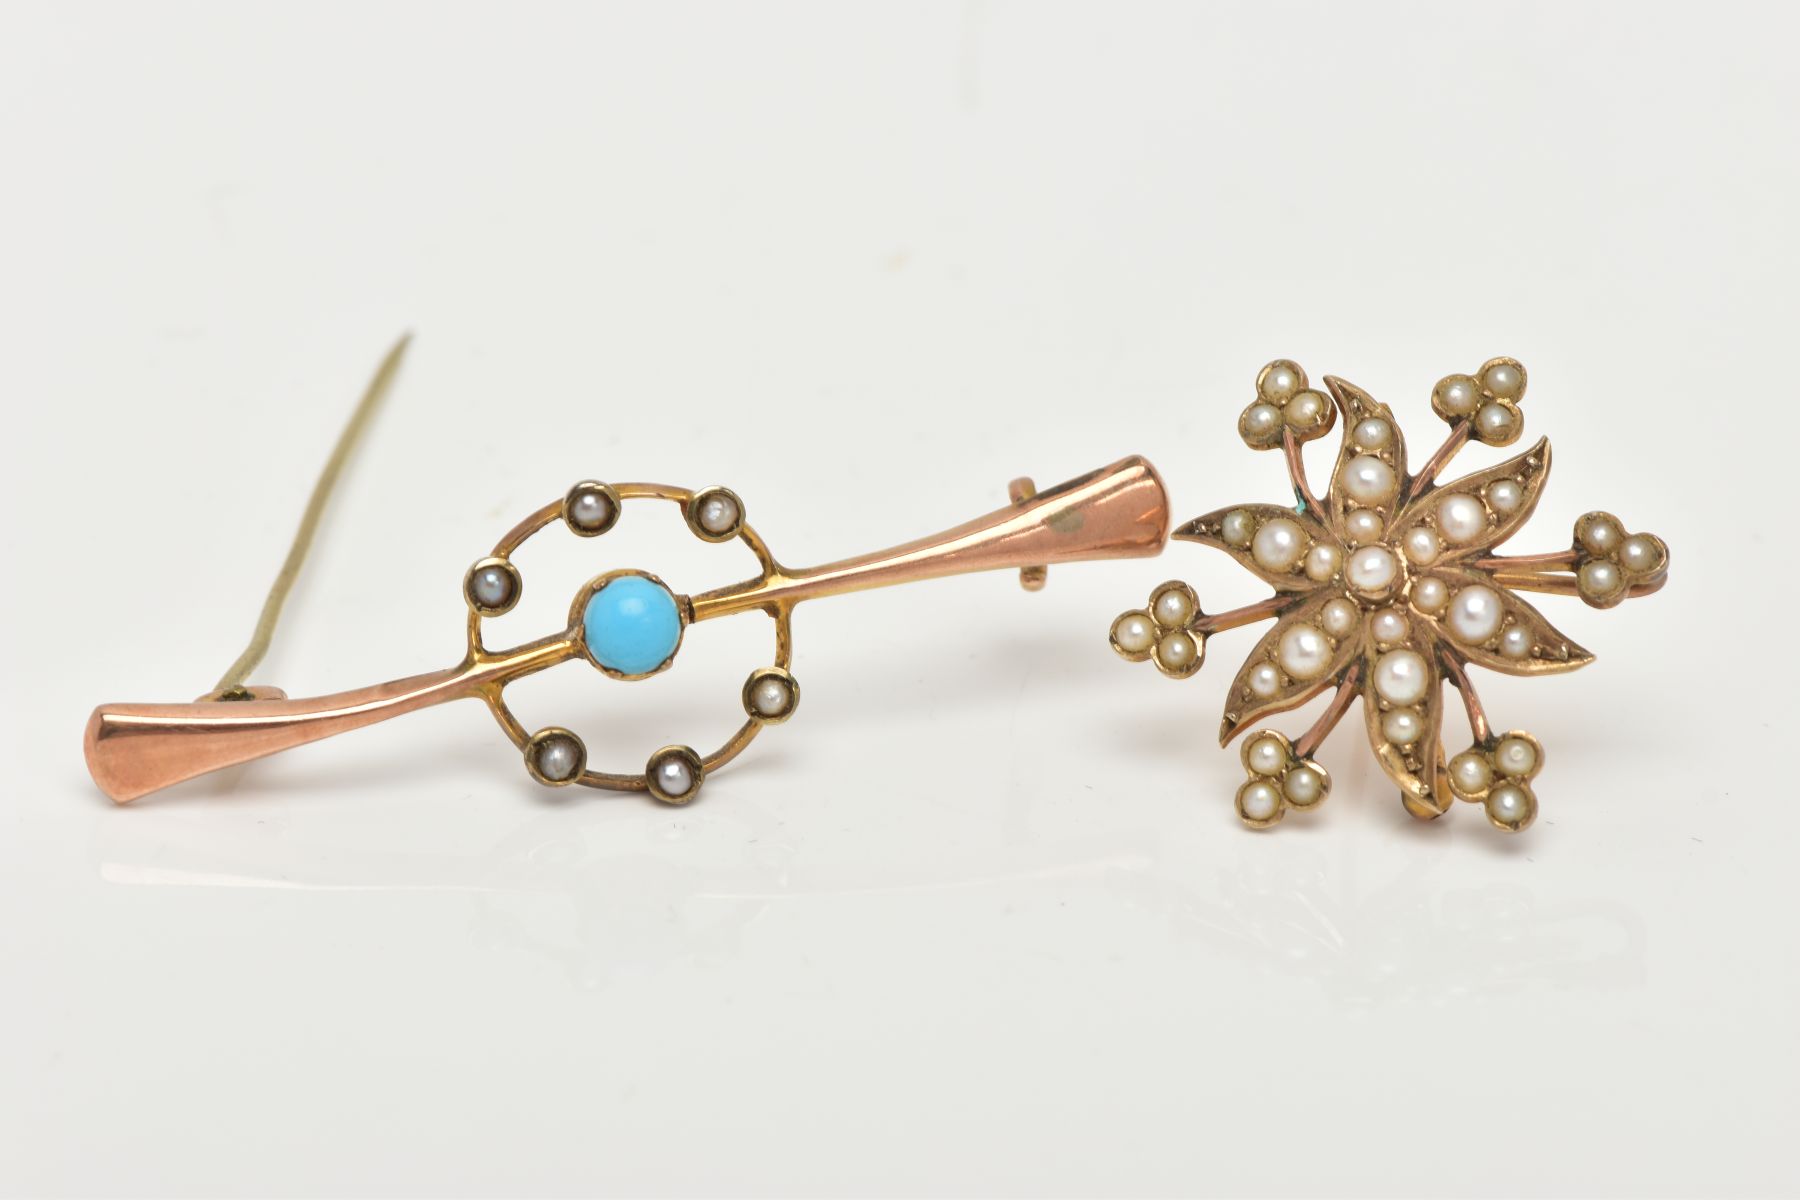 TWO EARLY 20TH CENTRURY GOLD BROOCHES, the first brooch of a yellow gold floral design, set with